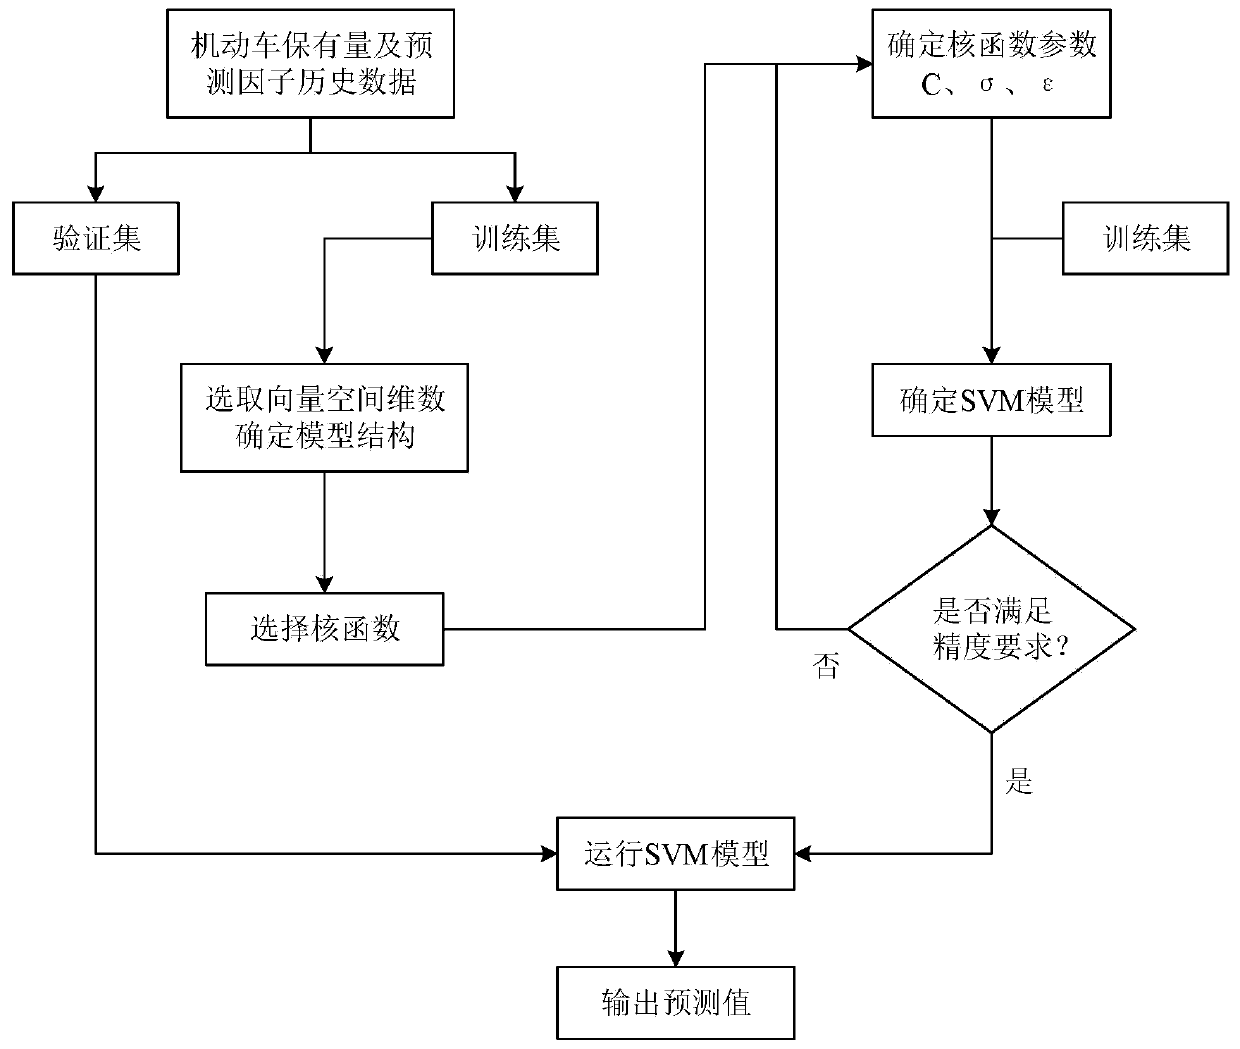 County urban motor vehicle ownership prediction method based on support vector machine